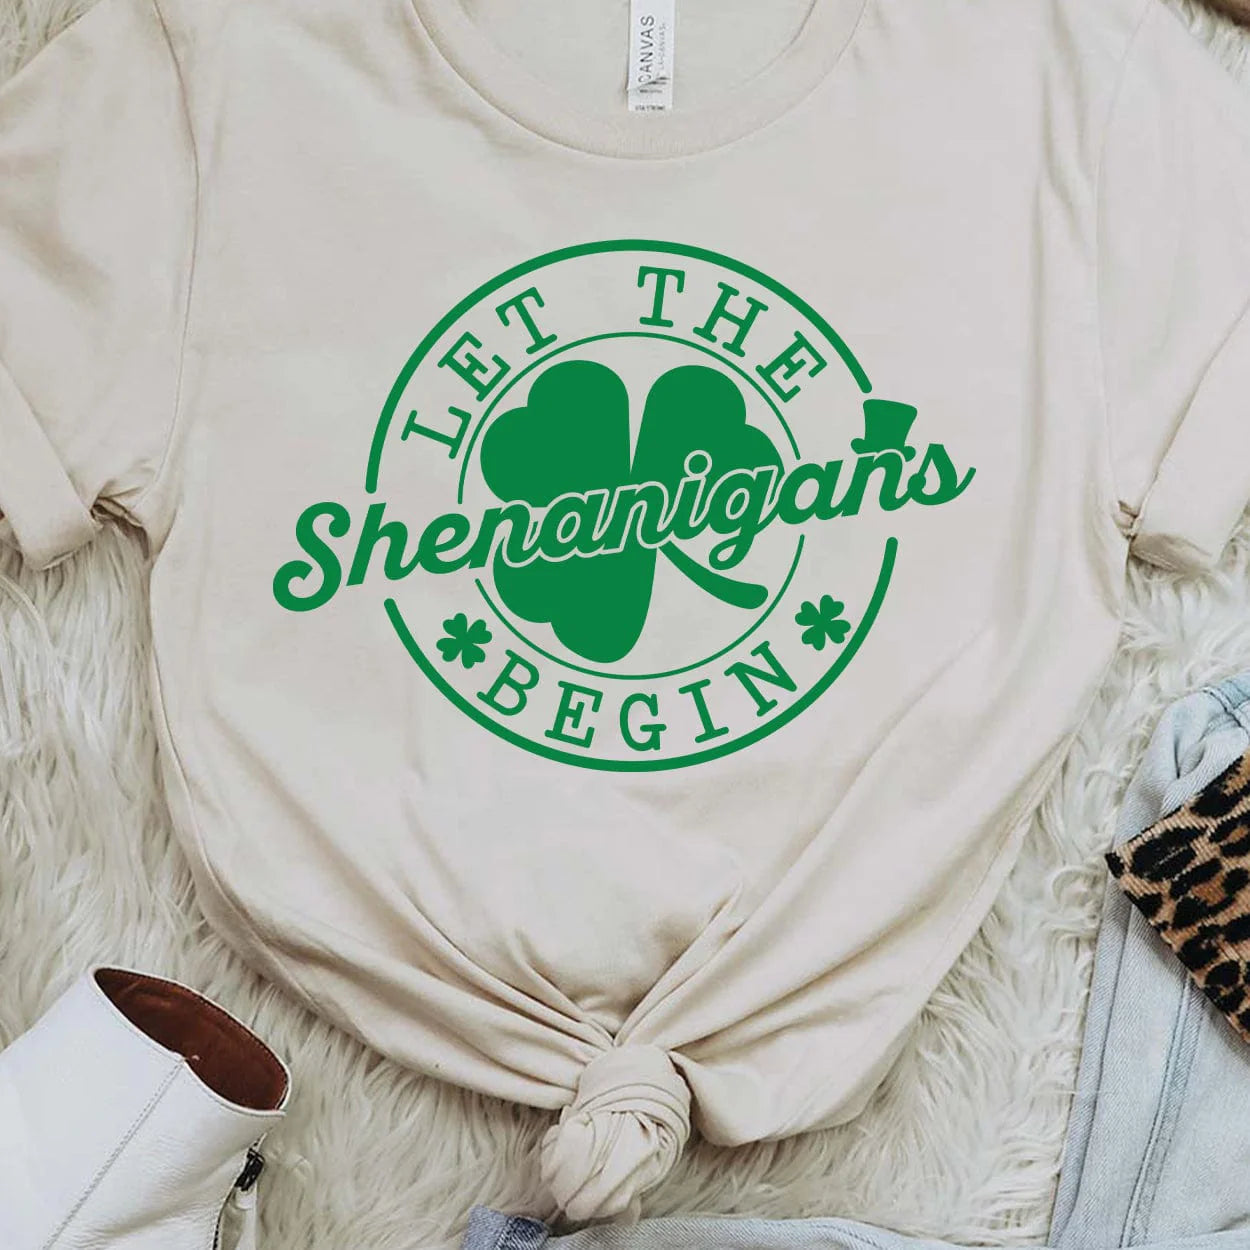 A cream short sleeve tee featuring a large circular graphic saying "Let the shenanigans begin" in dark green with a clover behind "shenanigans" and little clovers before and after "begin". Item is pictured on a white background